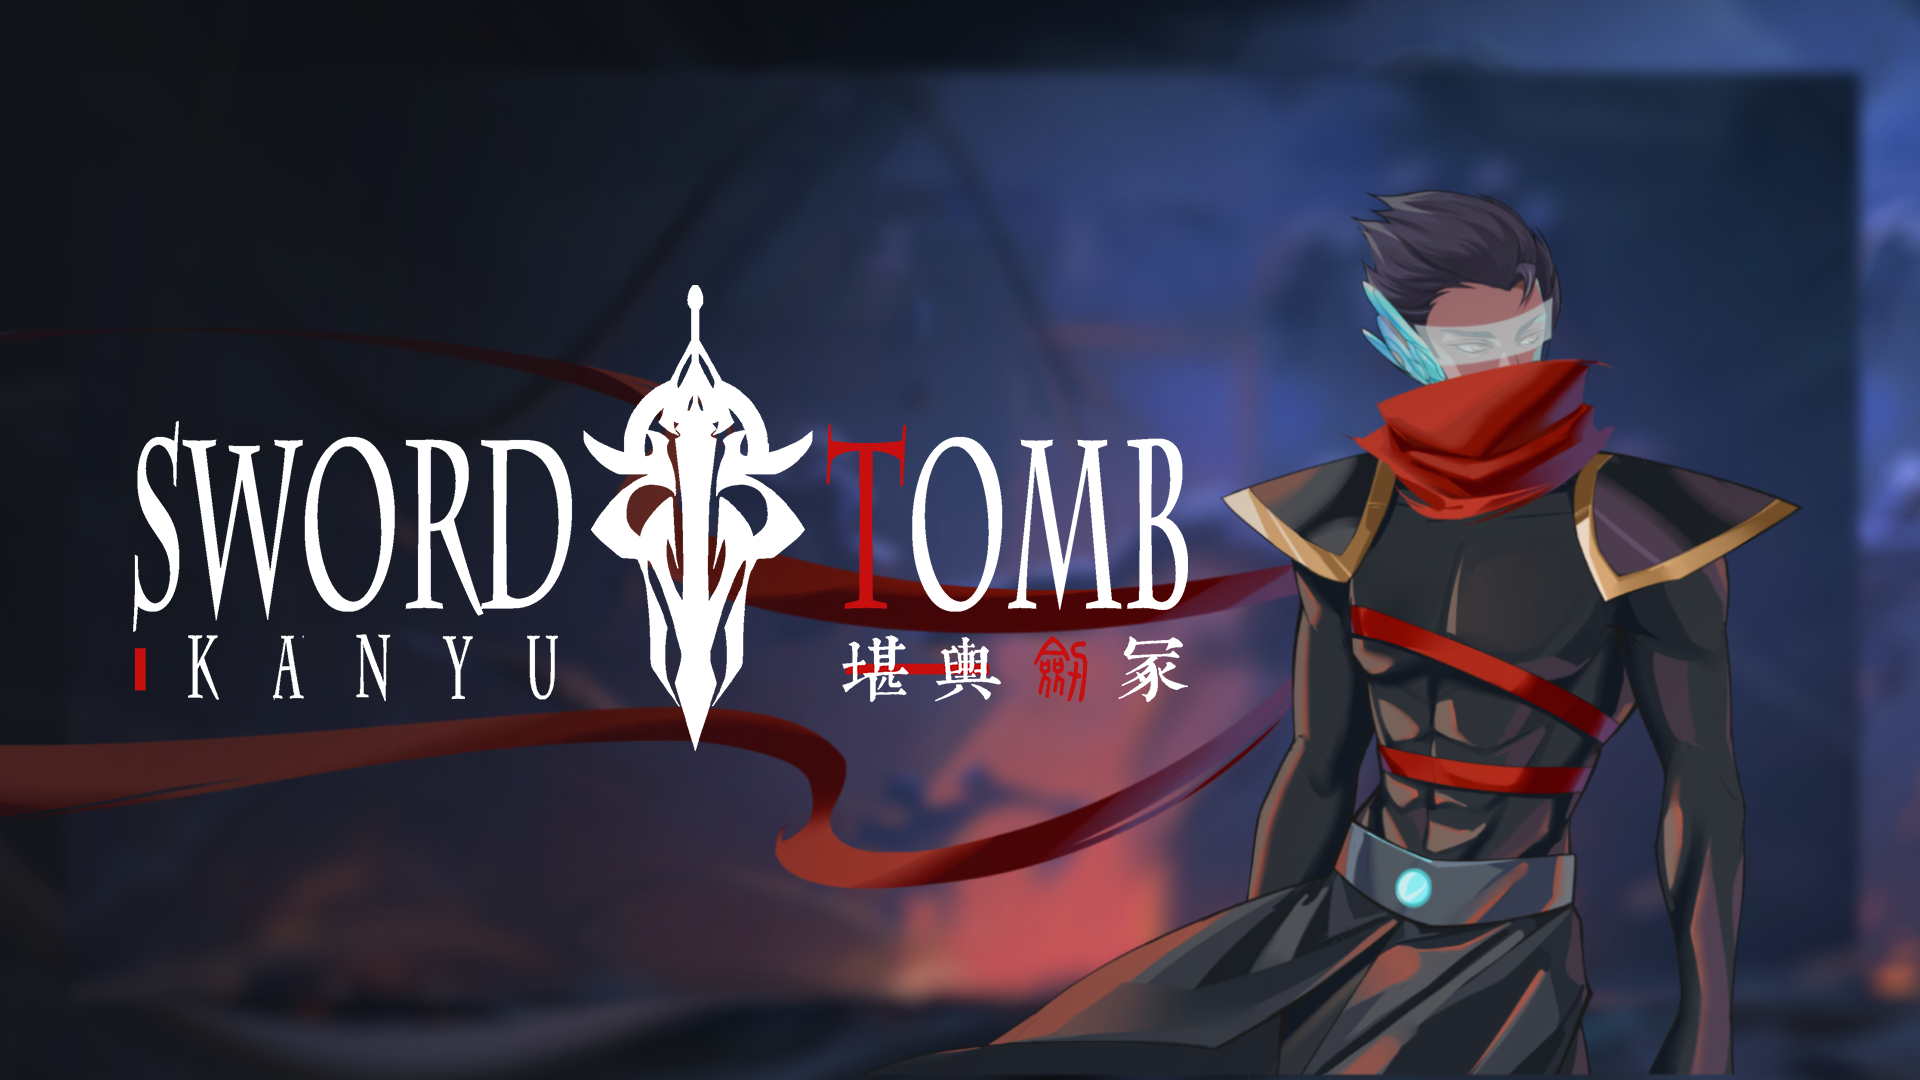 Banner of Kanyu-Sword Tomb 